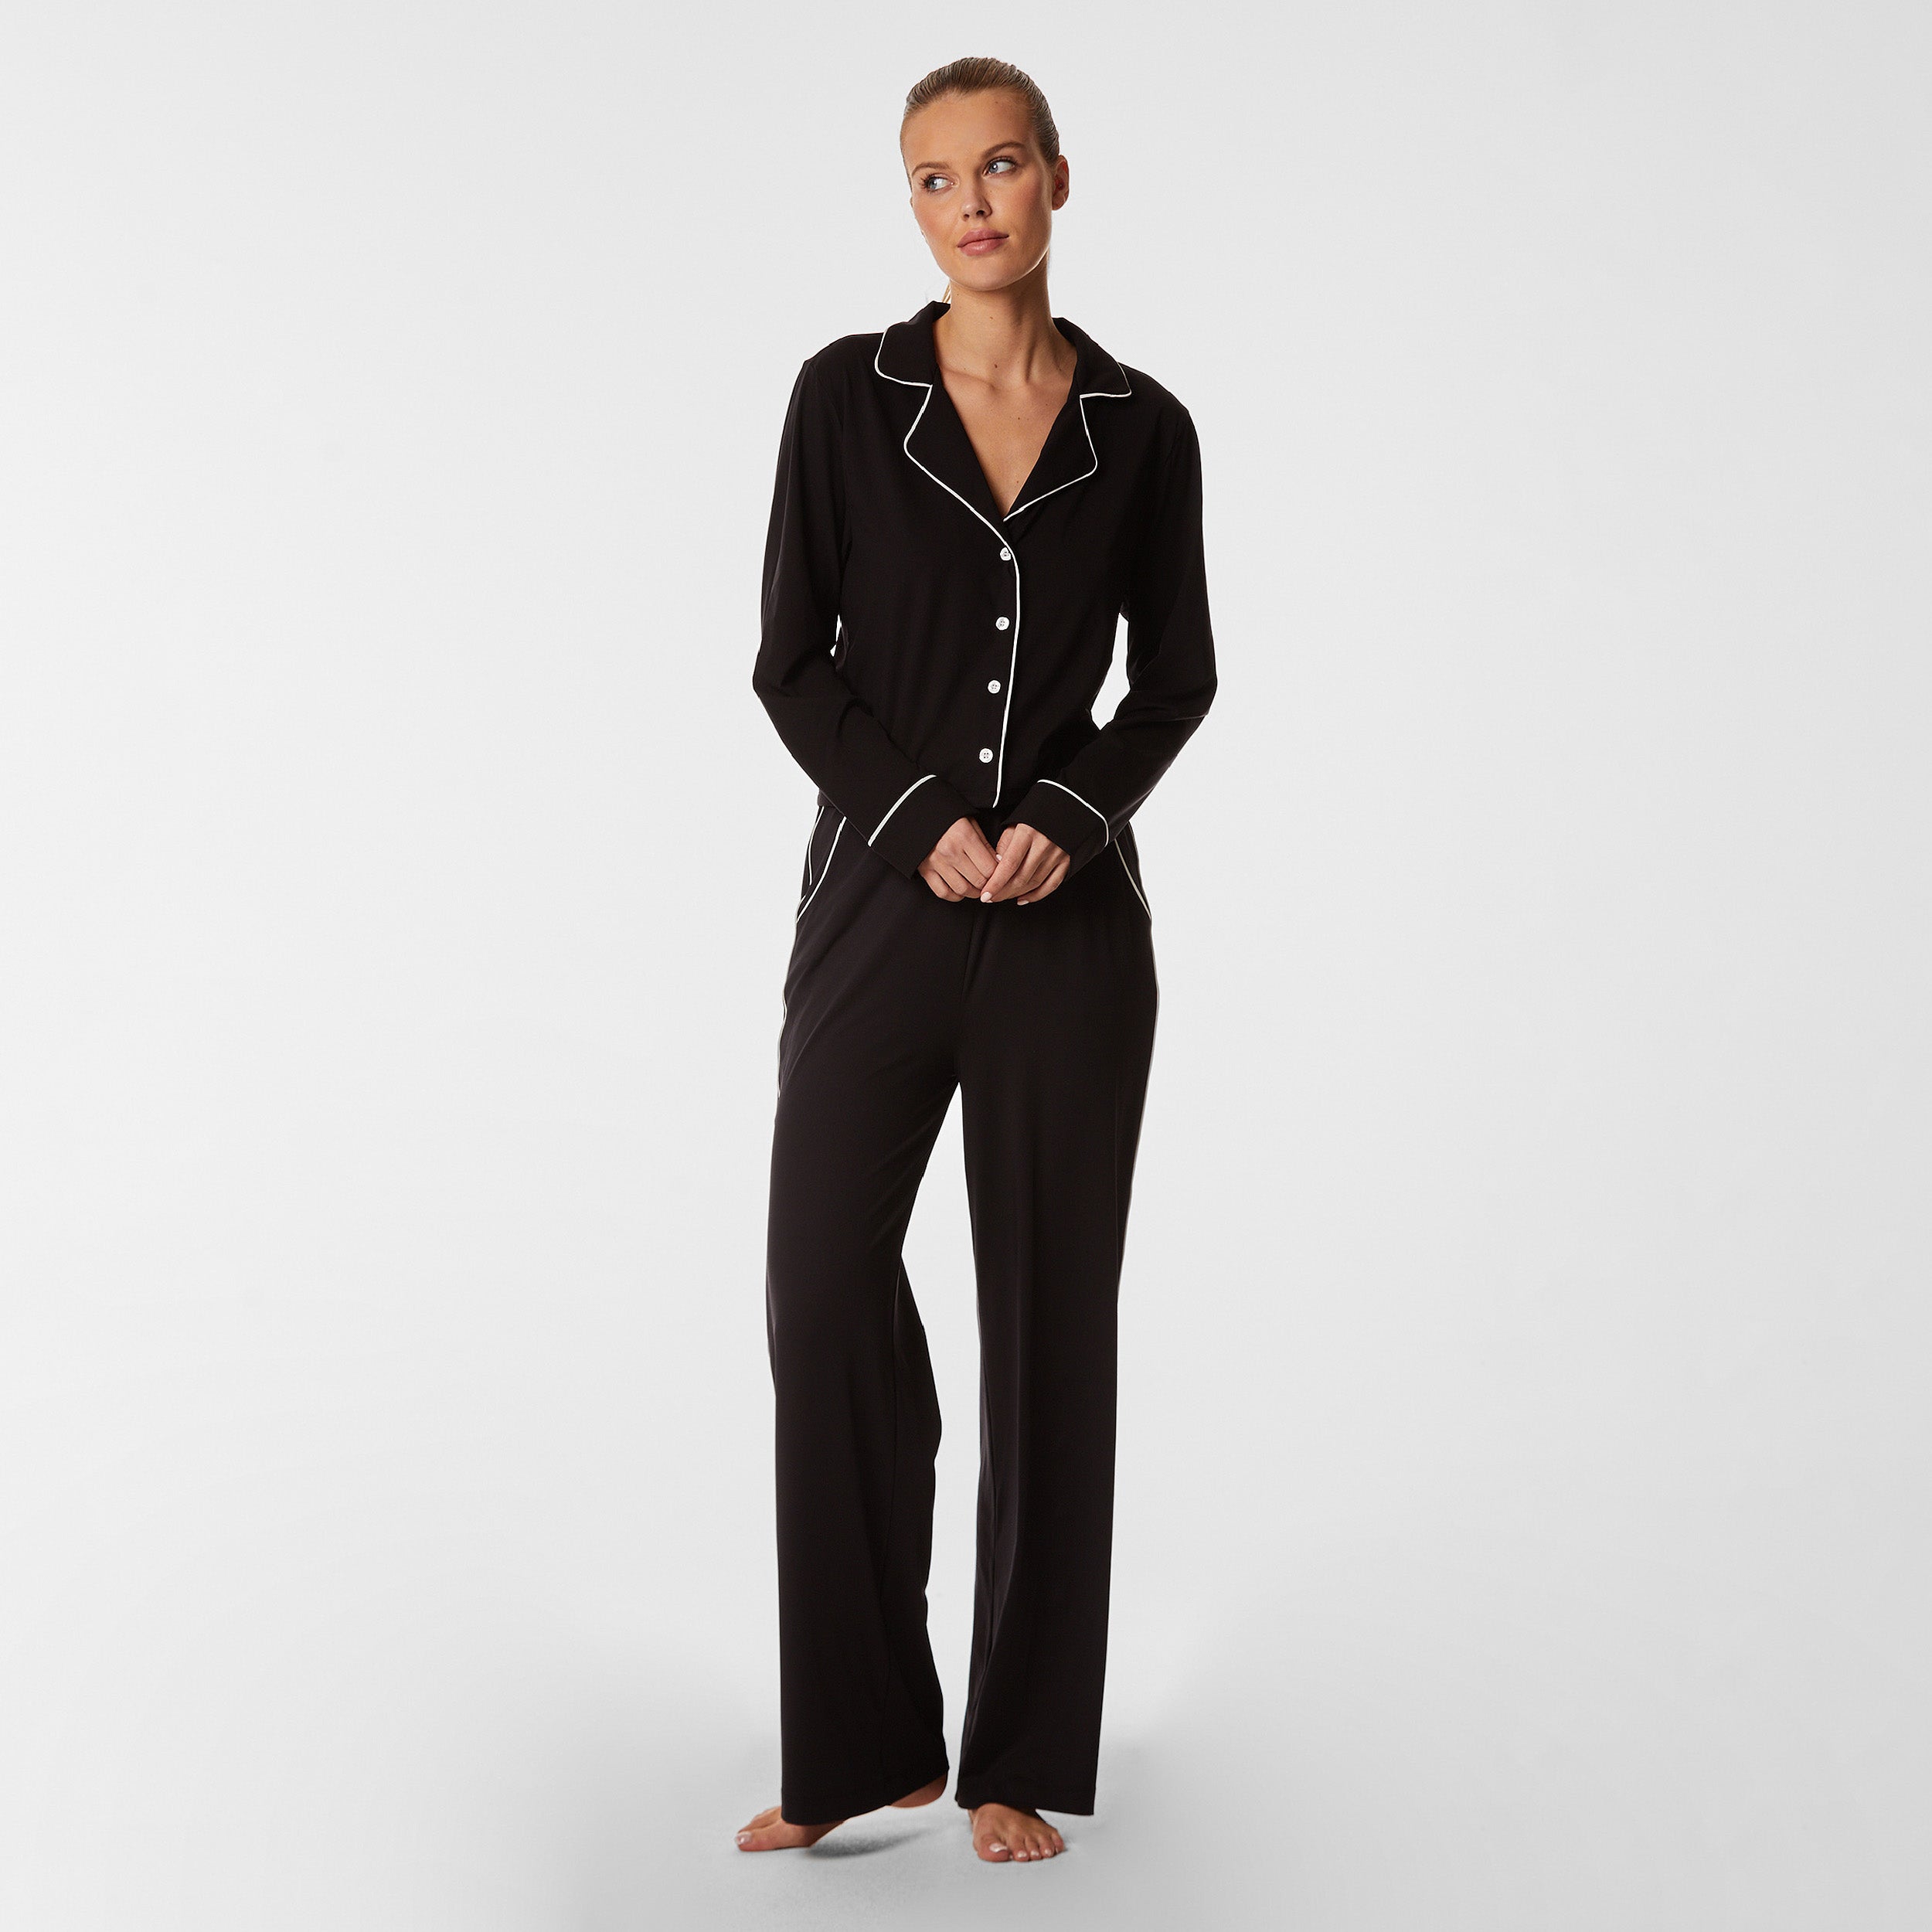 Full front view of woman wearing soft Black Pajama set with white piping detail.